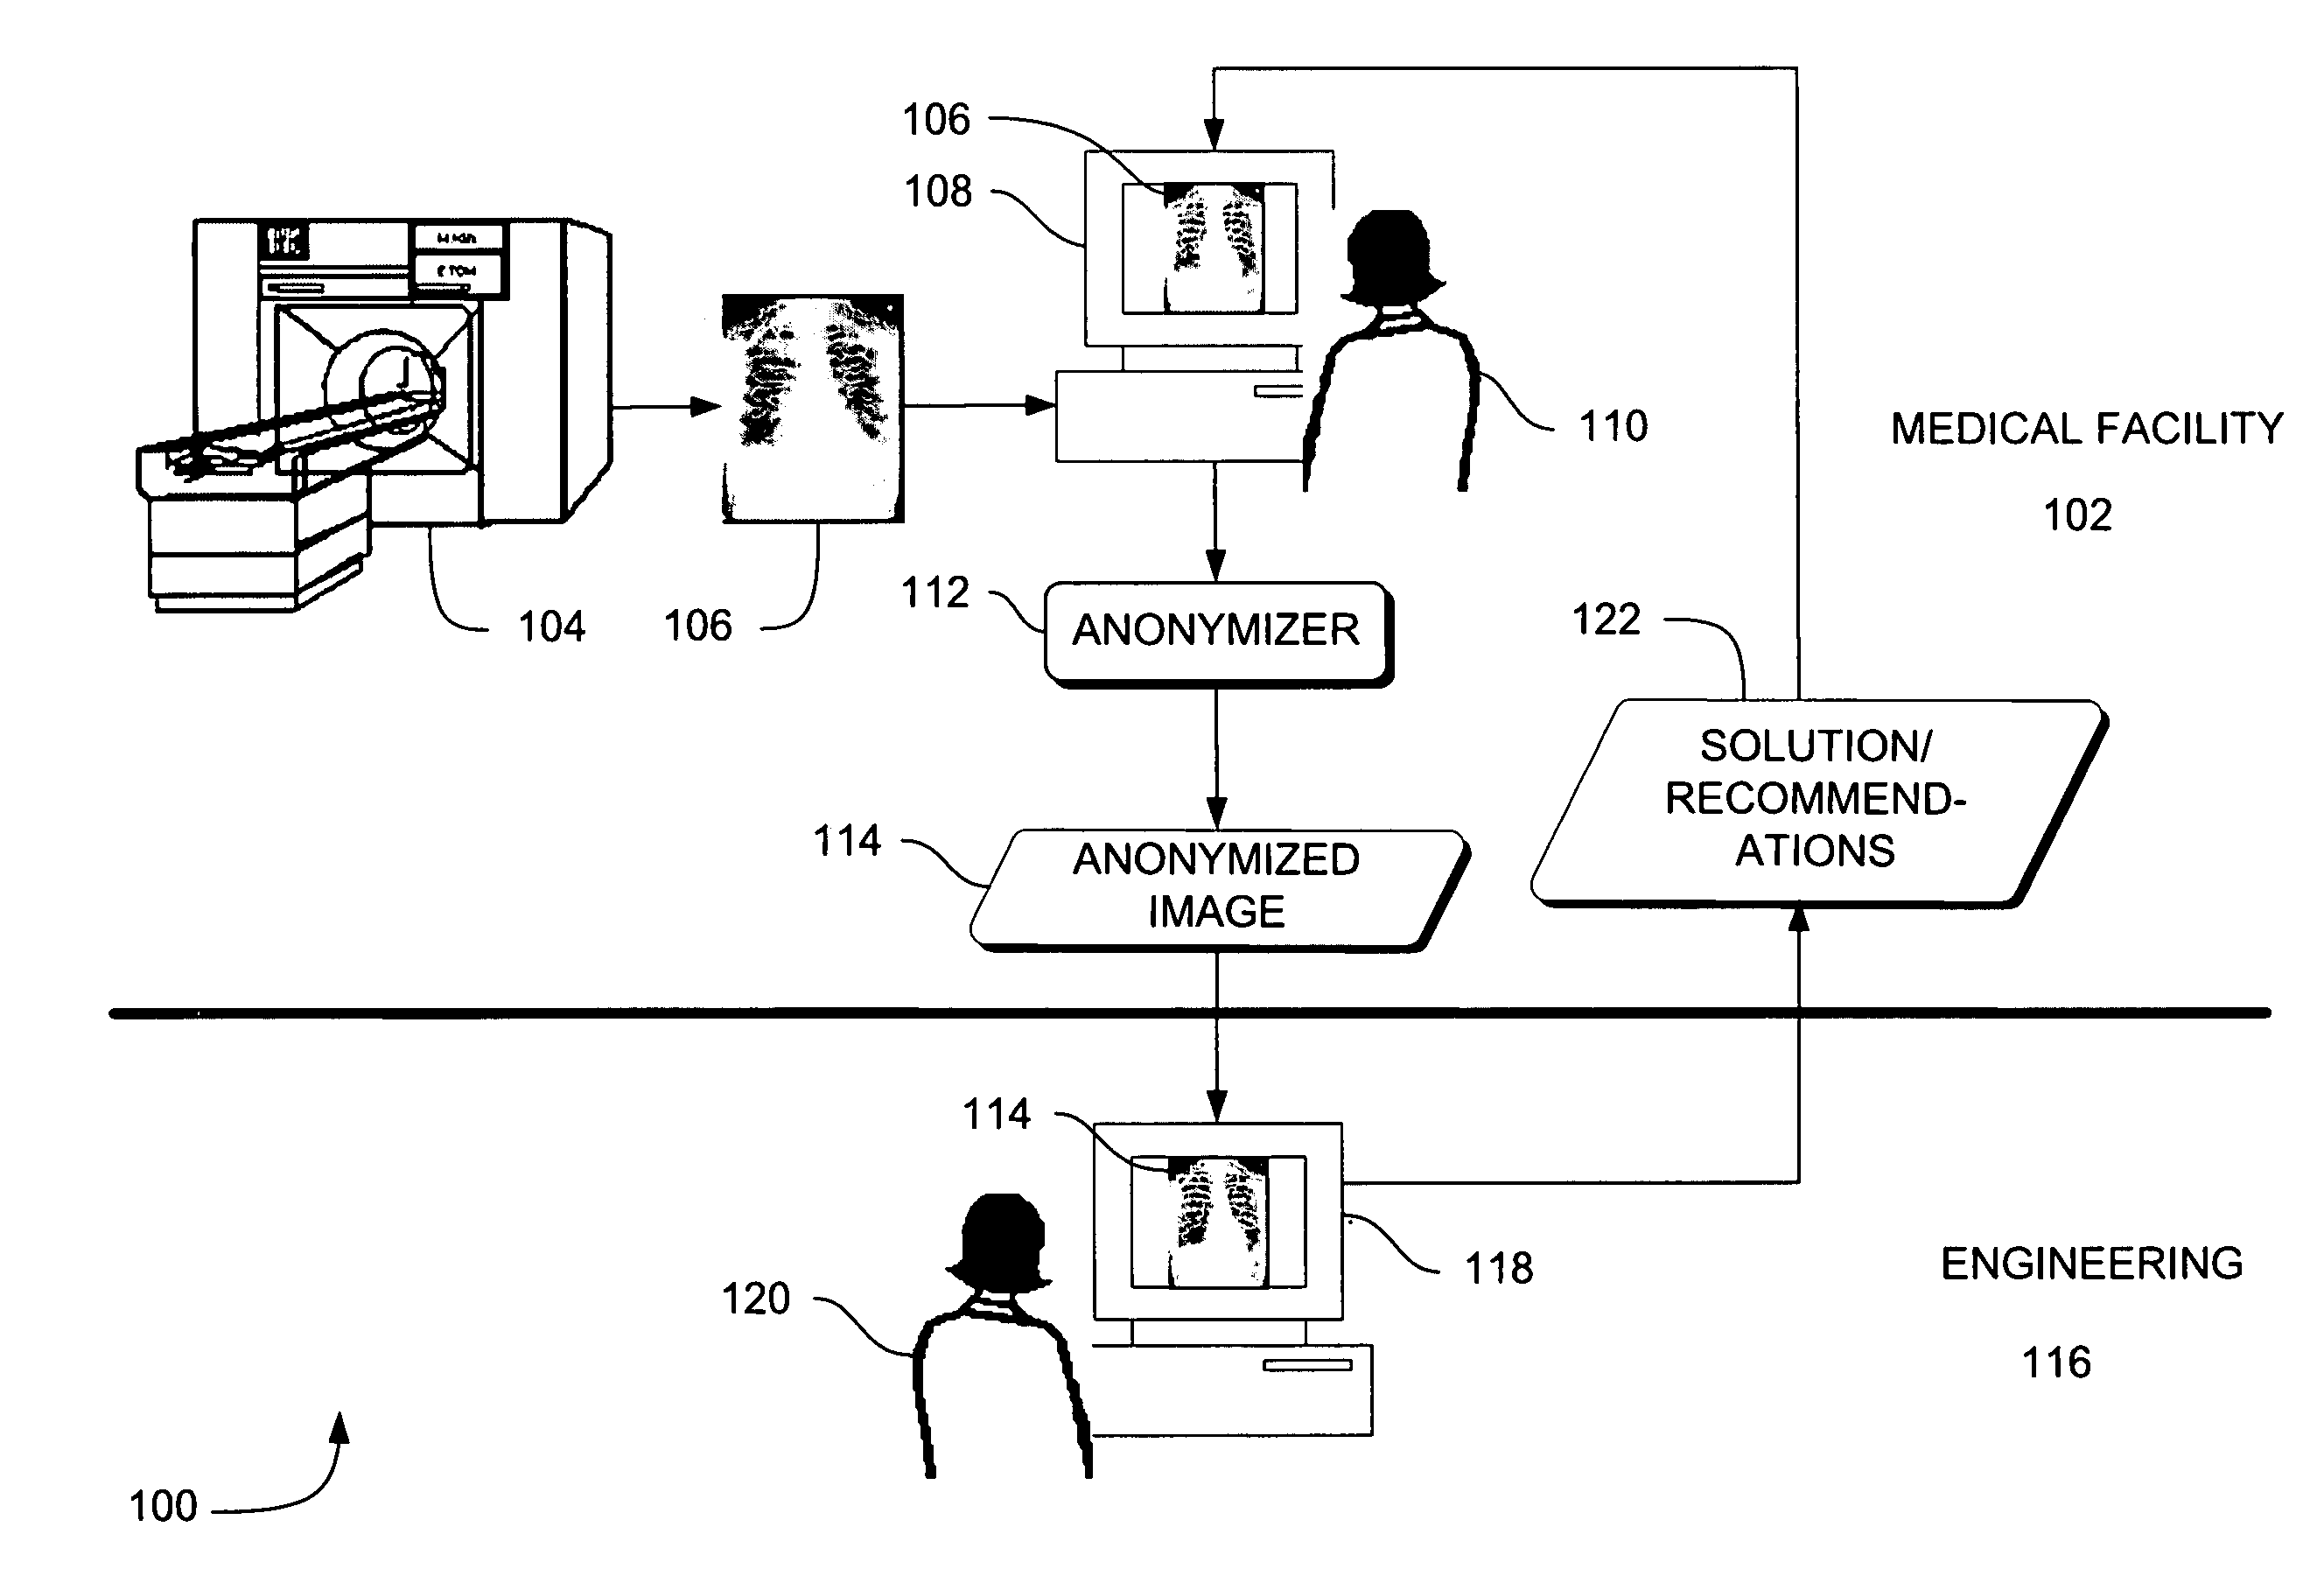 Systems, methods and apparatus to distribute images for quality control